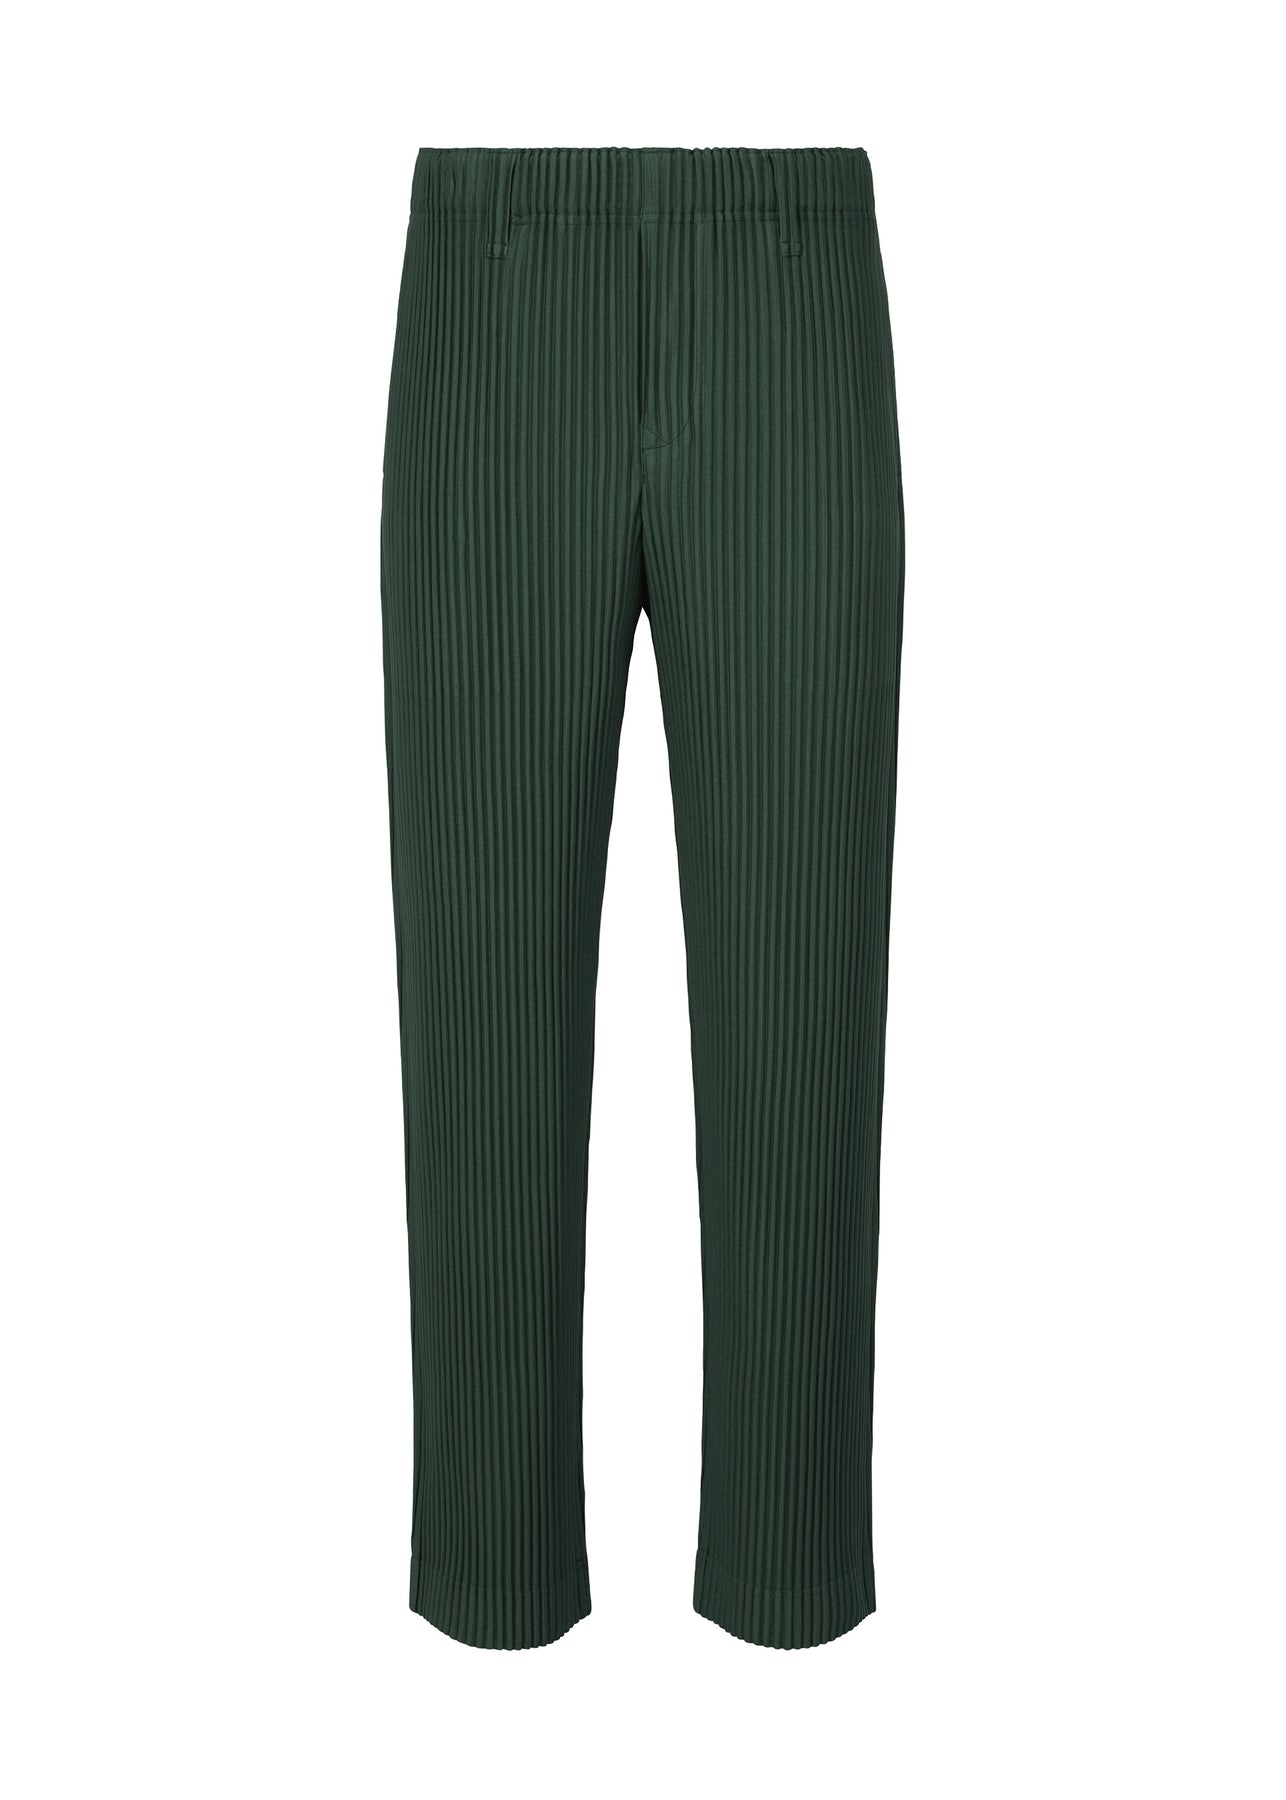 COLOR PLEATS PANTS | The official ISSEY MIYAKE ONLINE STORE 